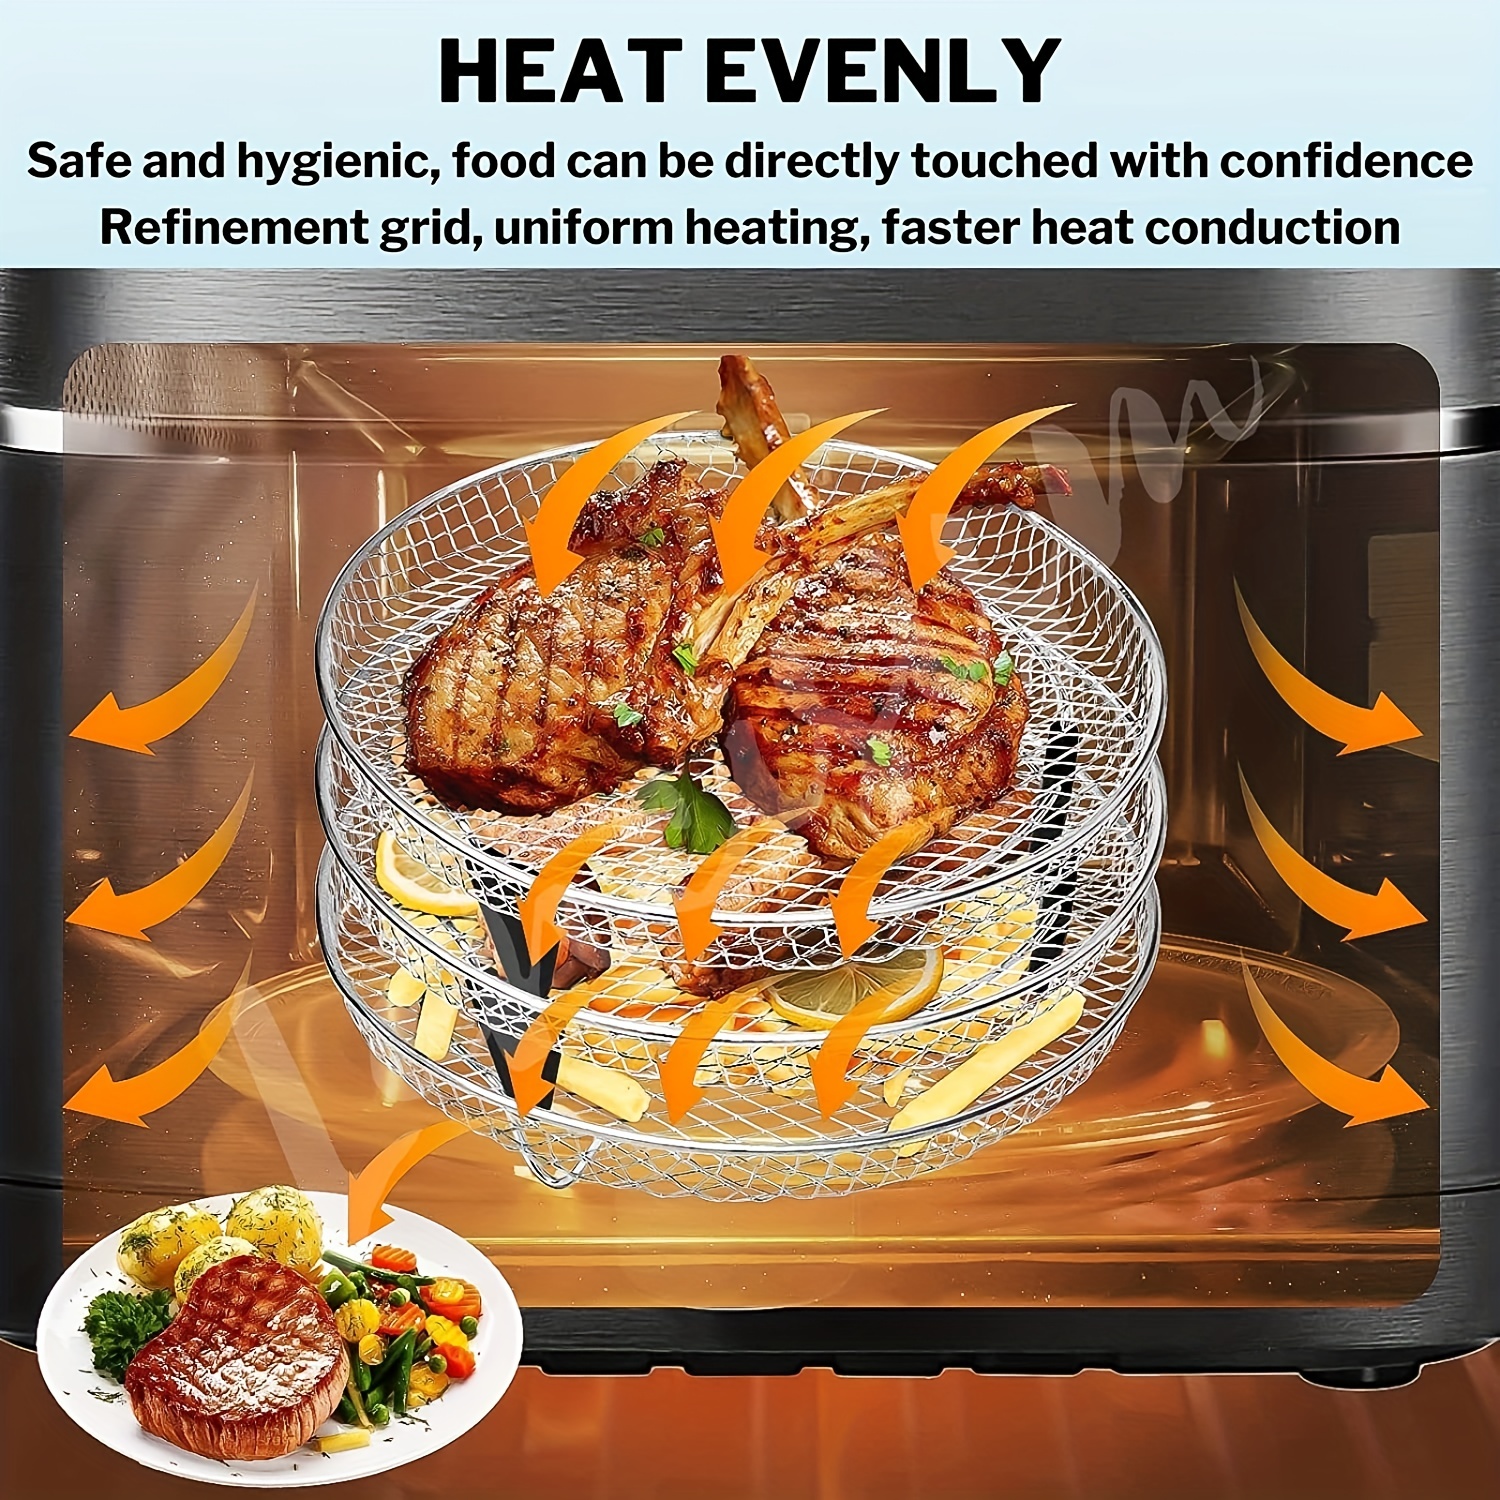 Chefman 8-Quart Stainless Steel Air Fryer in the Air Fryers department at